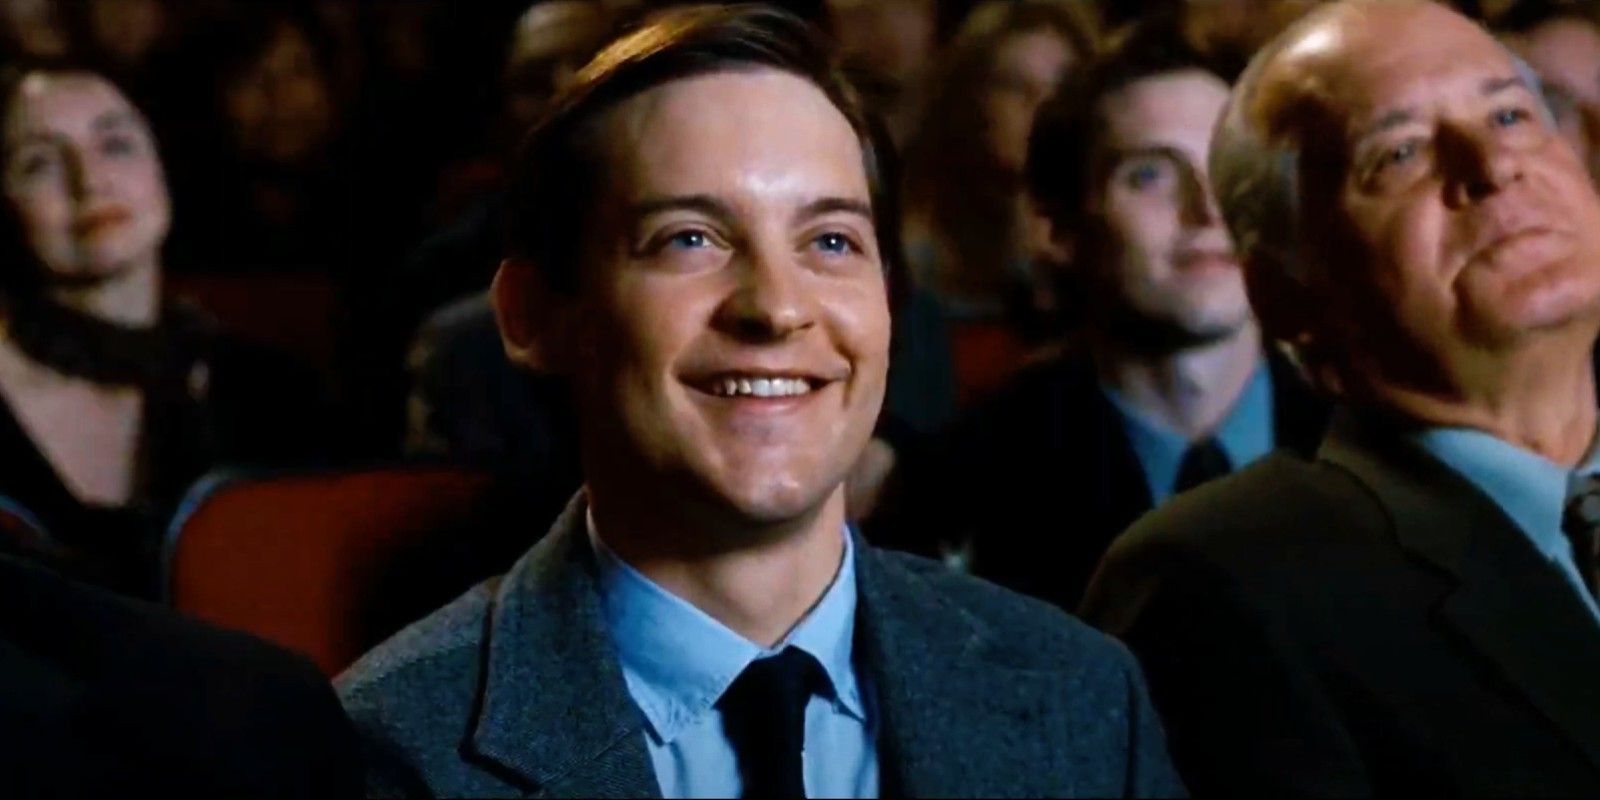 Andrew Garfield & Tobey Maguire Snuck Into Theater To Watch No Way Home